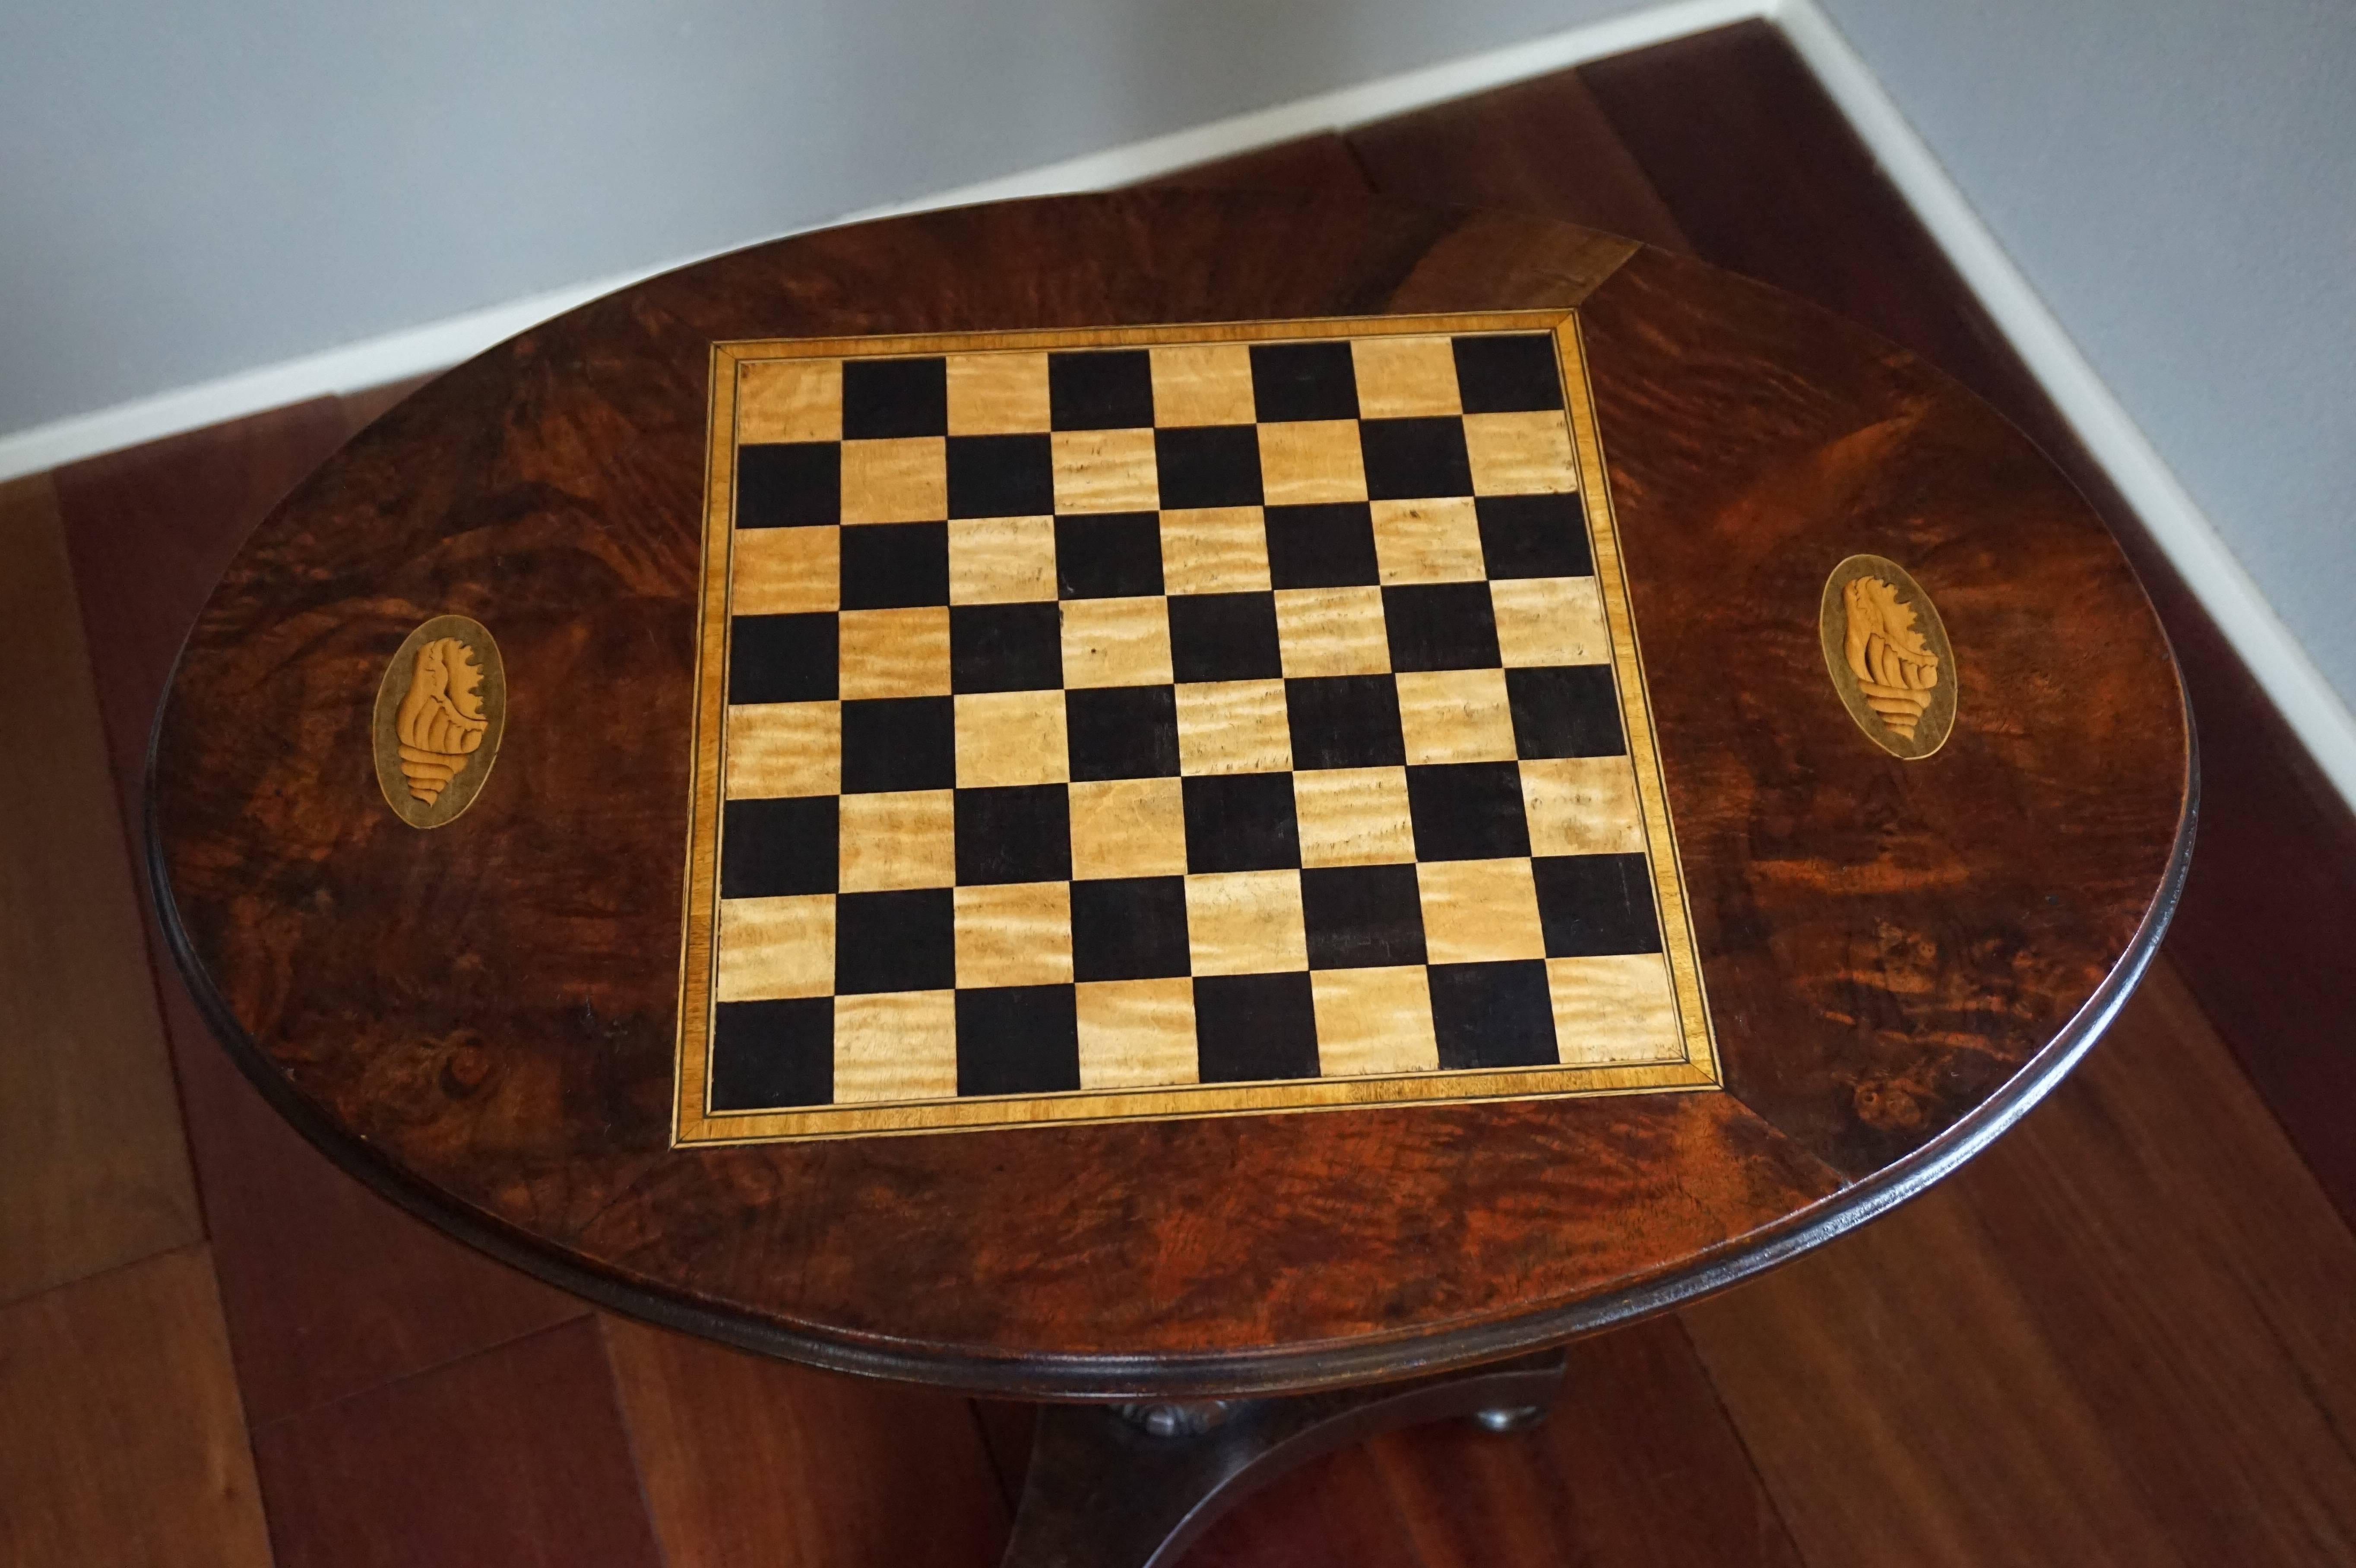 Stunning and practical size, oval chess table inlaid with satinwood.

If you are chess playing enthousiast and you like to play the game of chess with family or friends then this table could be perfect for you. Even if you hardly play at all, it is